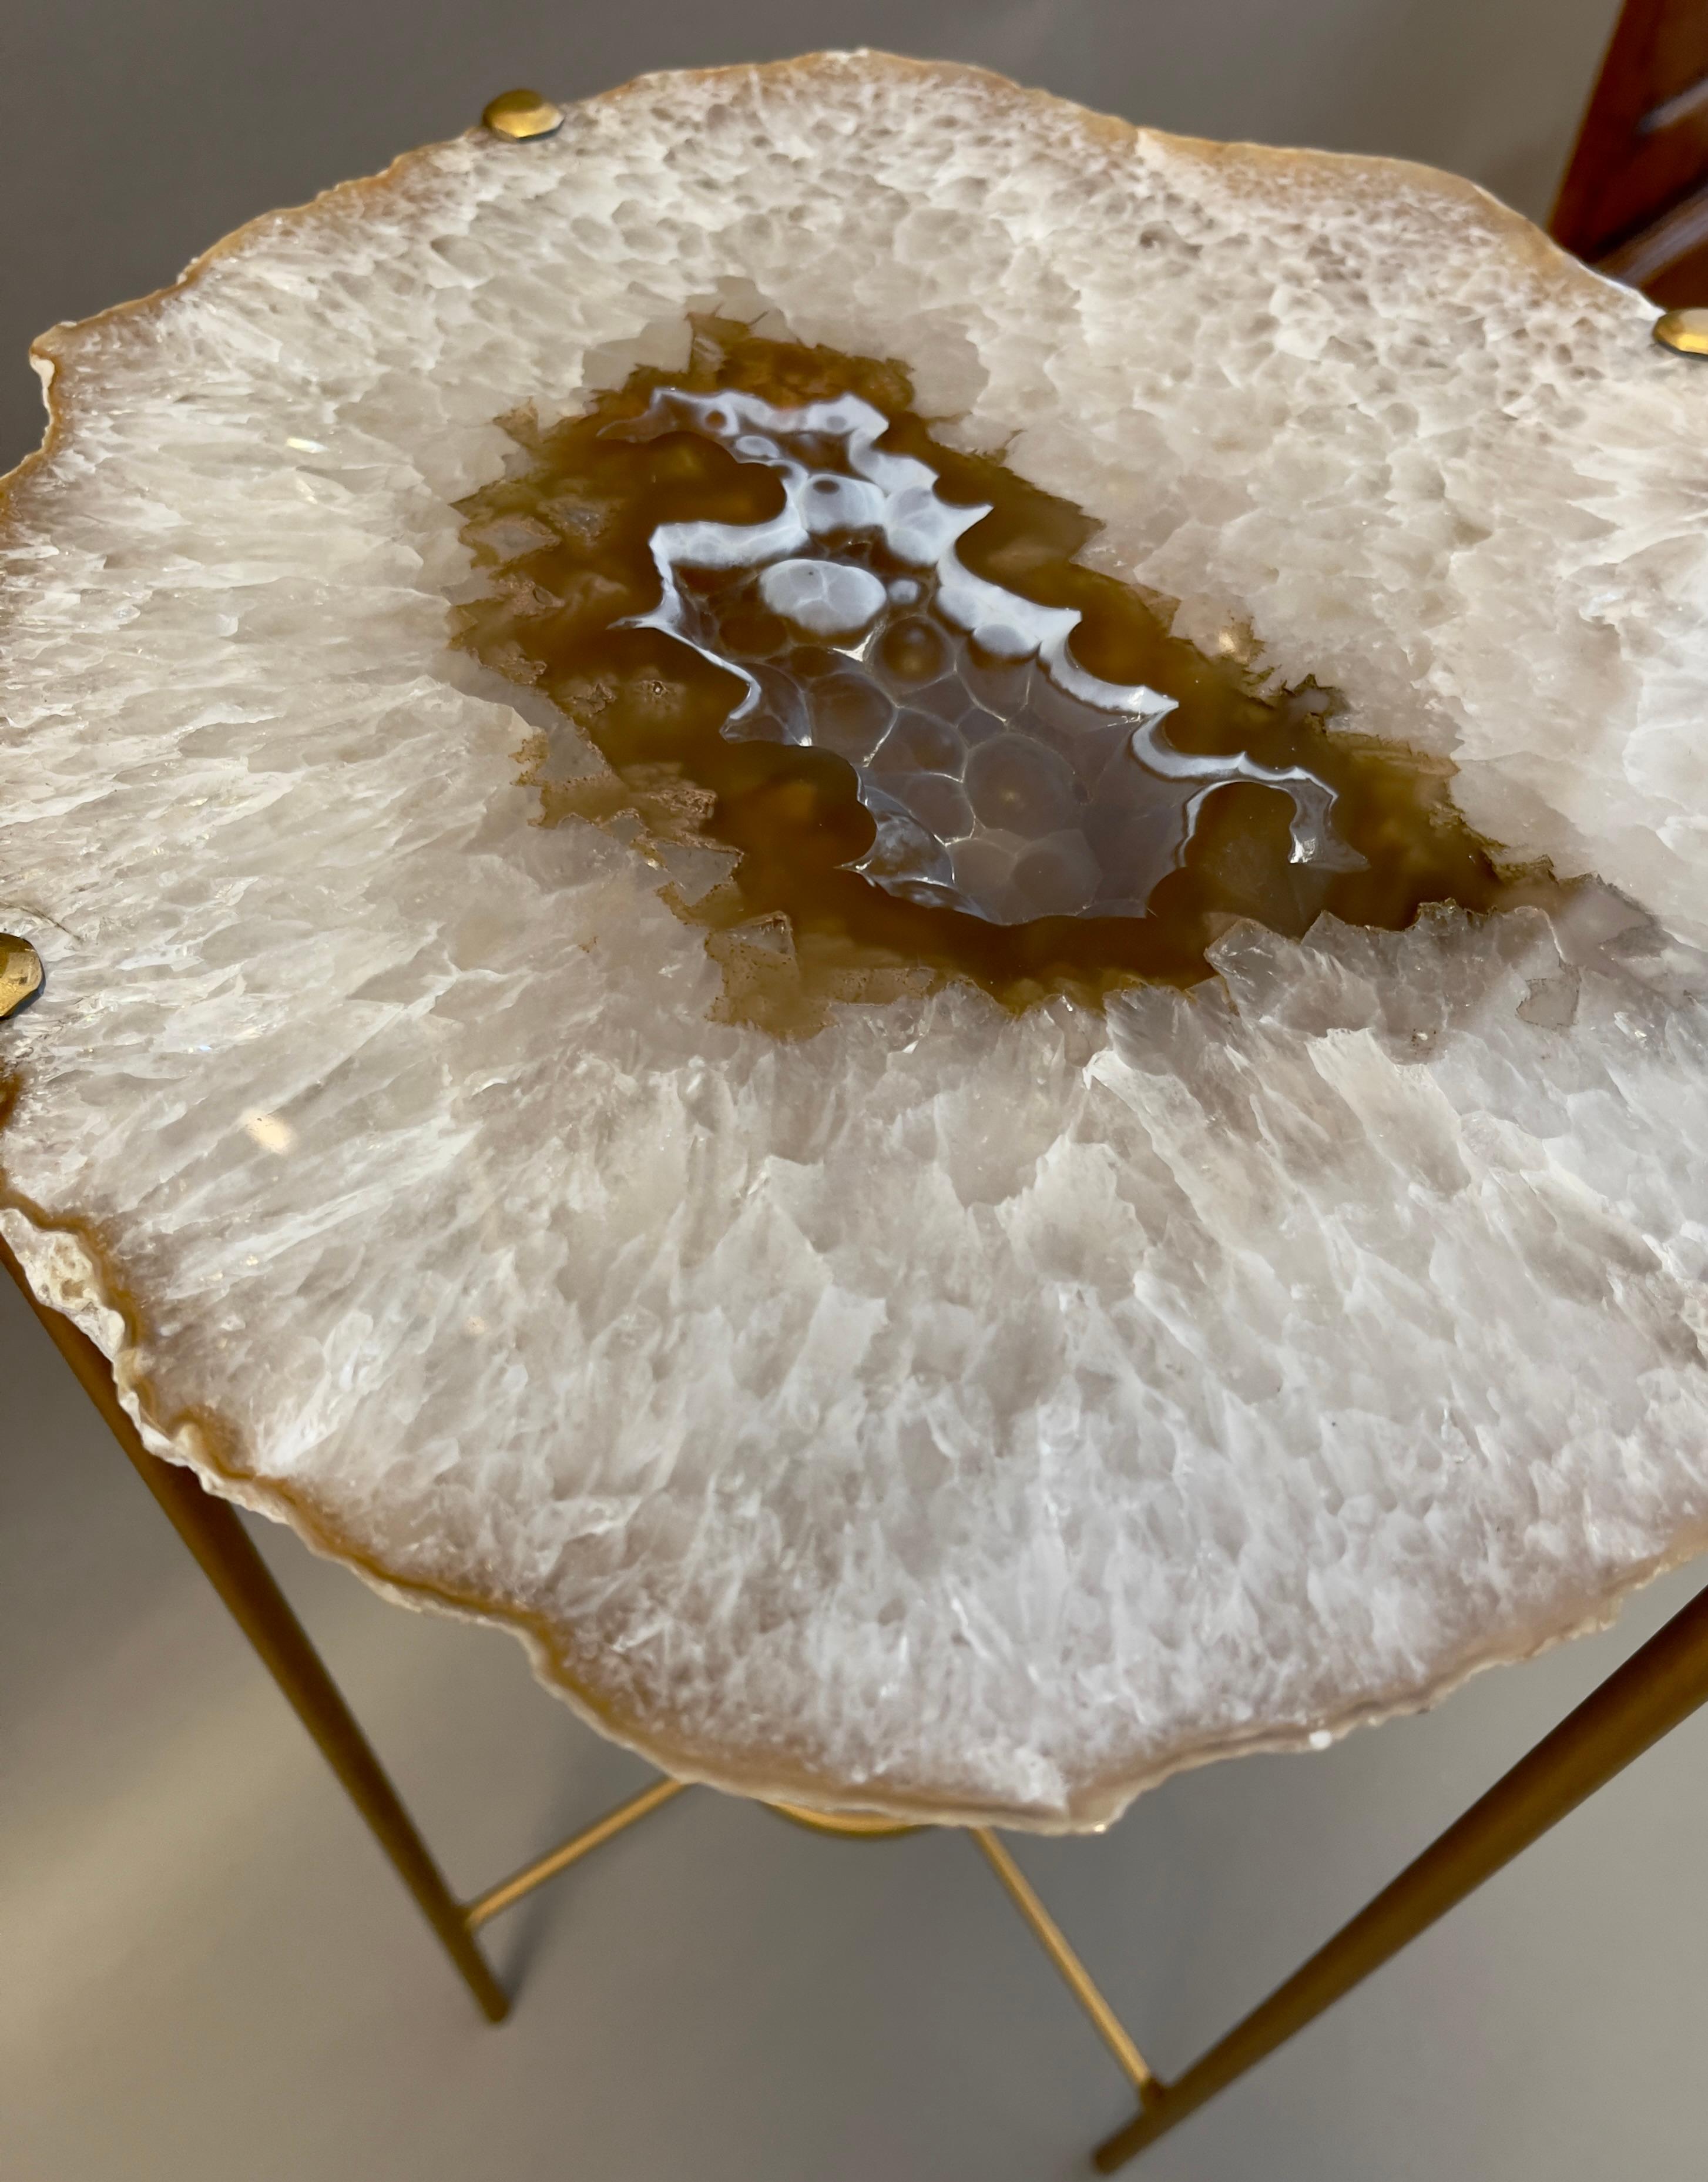 Our gorgeous geode drinks tables are a perfect addition to any room, but particularly when light catches them just right. Each Agate surface unique in color, points of interest and shape.

Handcrafted with polished quartzite slabs atop a gilt